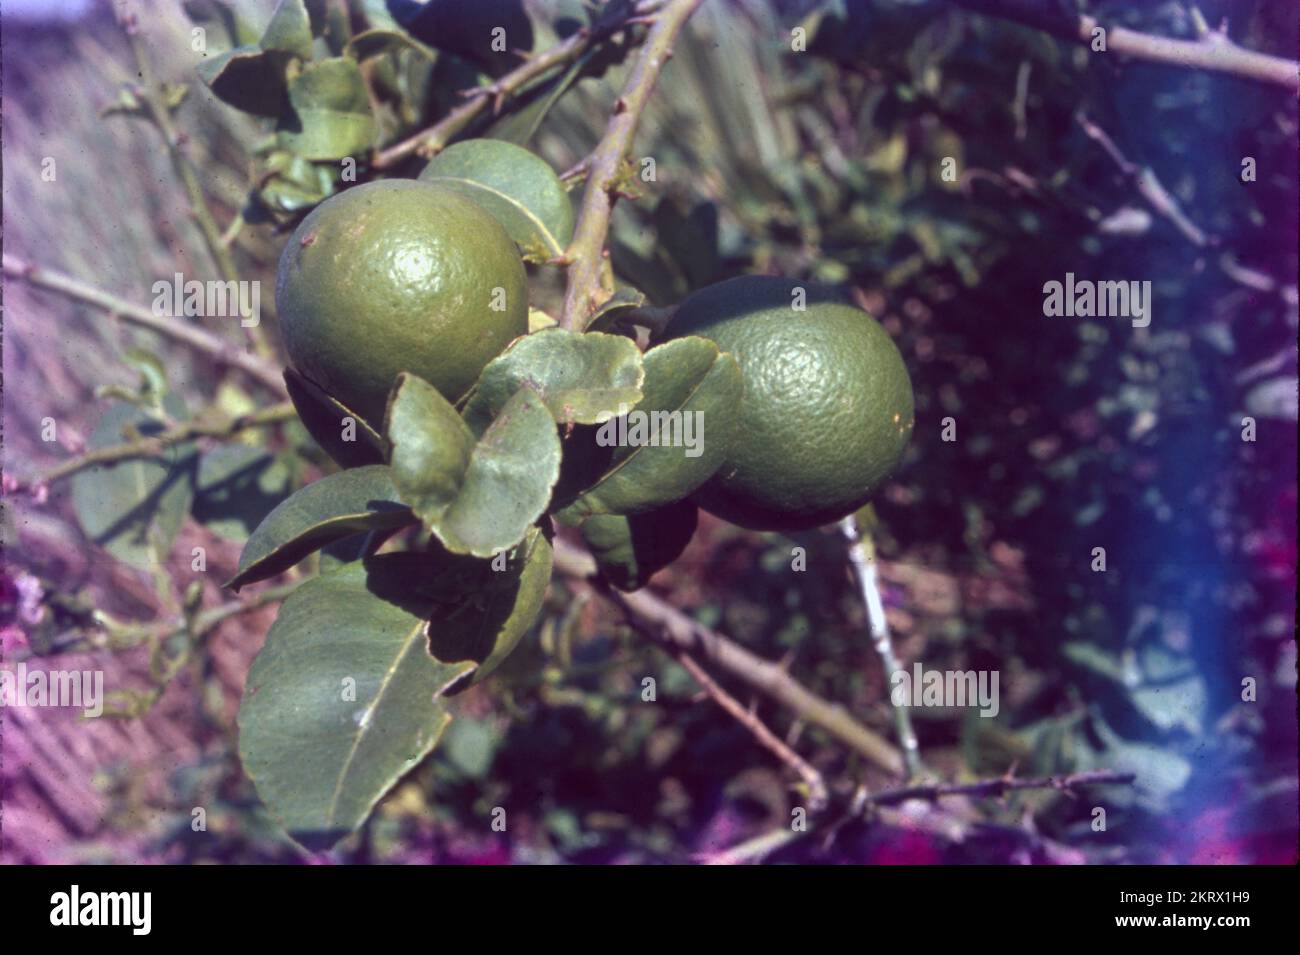 The lemon is a species of small evergreen trees in the flowering plant family Rutaceae, native to Asia, primarily Northeast India, Northern Myanmar or China.The lemon (Citrus limon) is a species of small evergreen trees in the flowering plant family Rutaceae, native to Asia, primarily Northeast India (Assam) Stock Photo